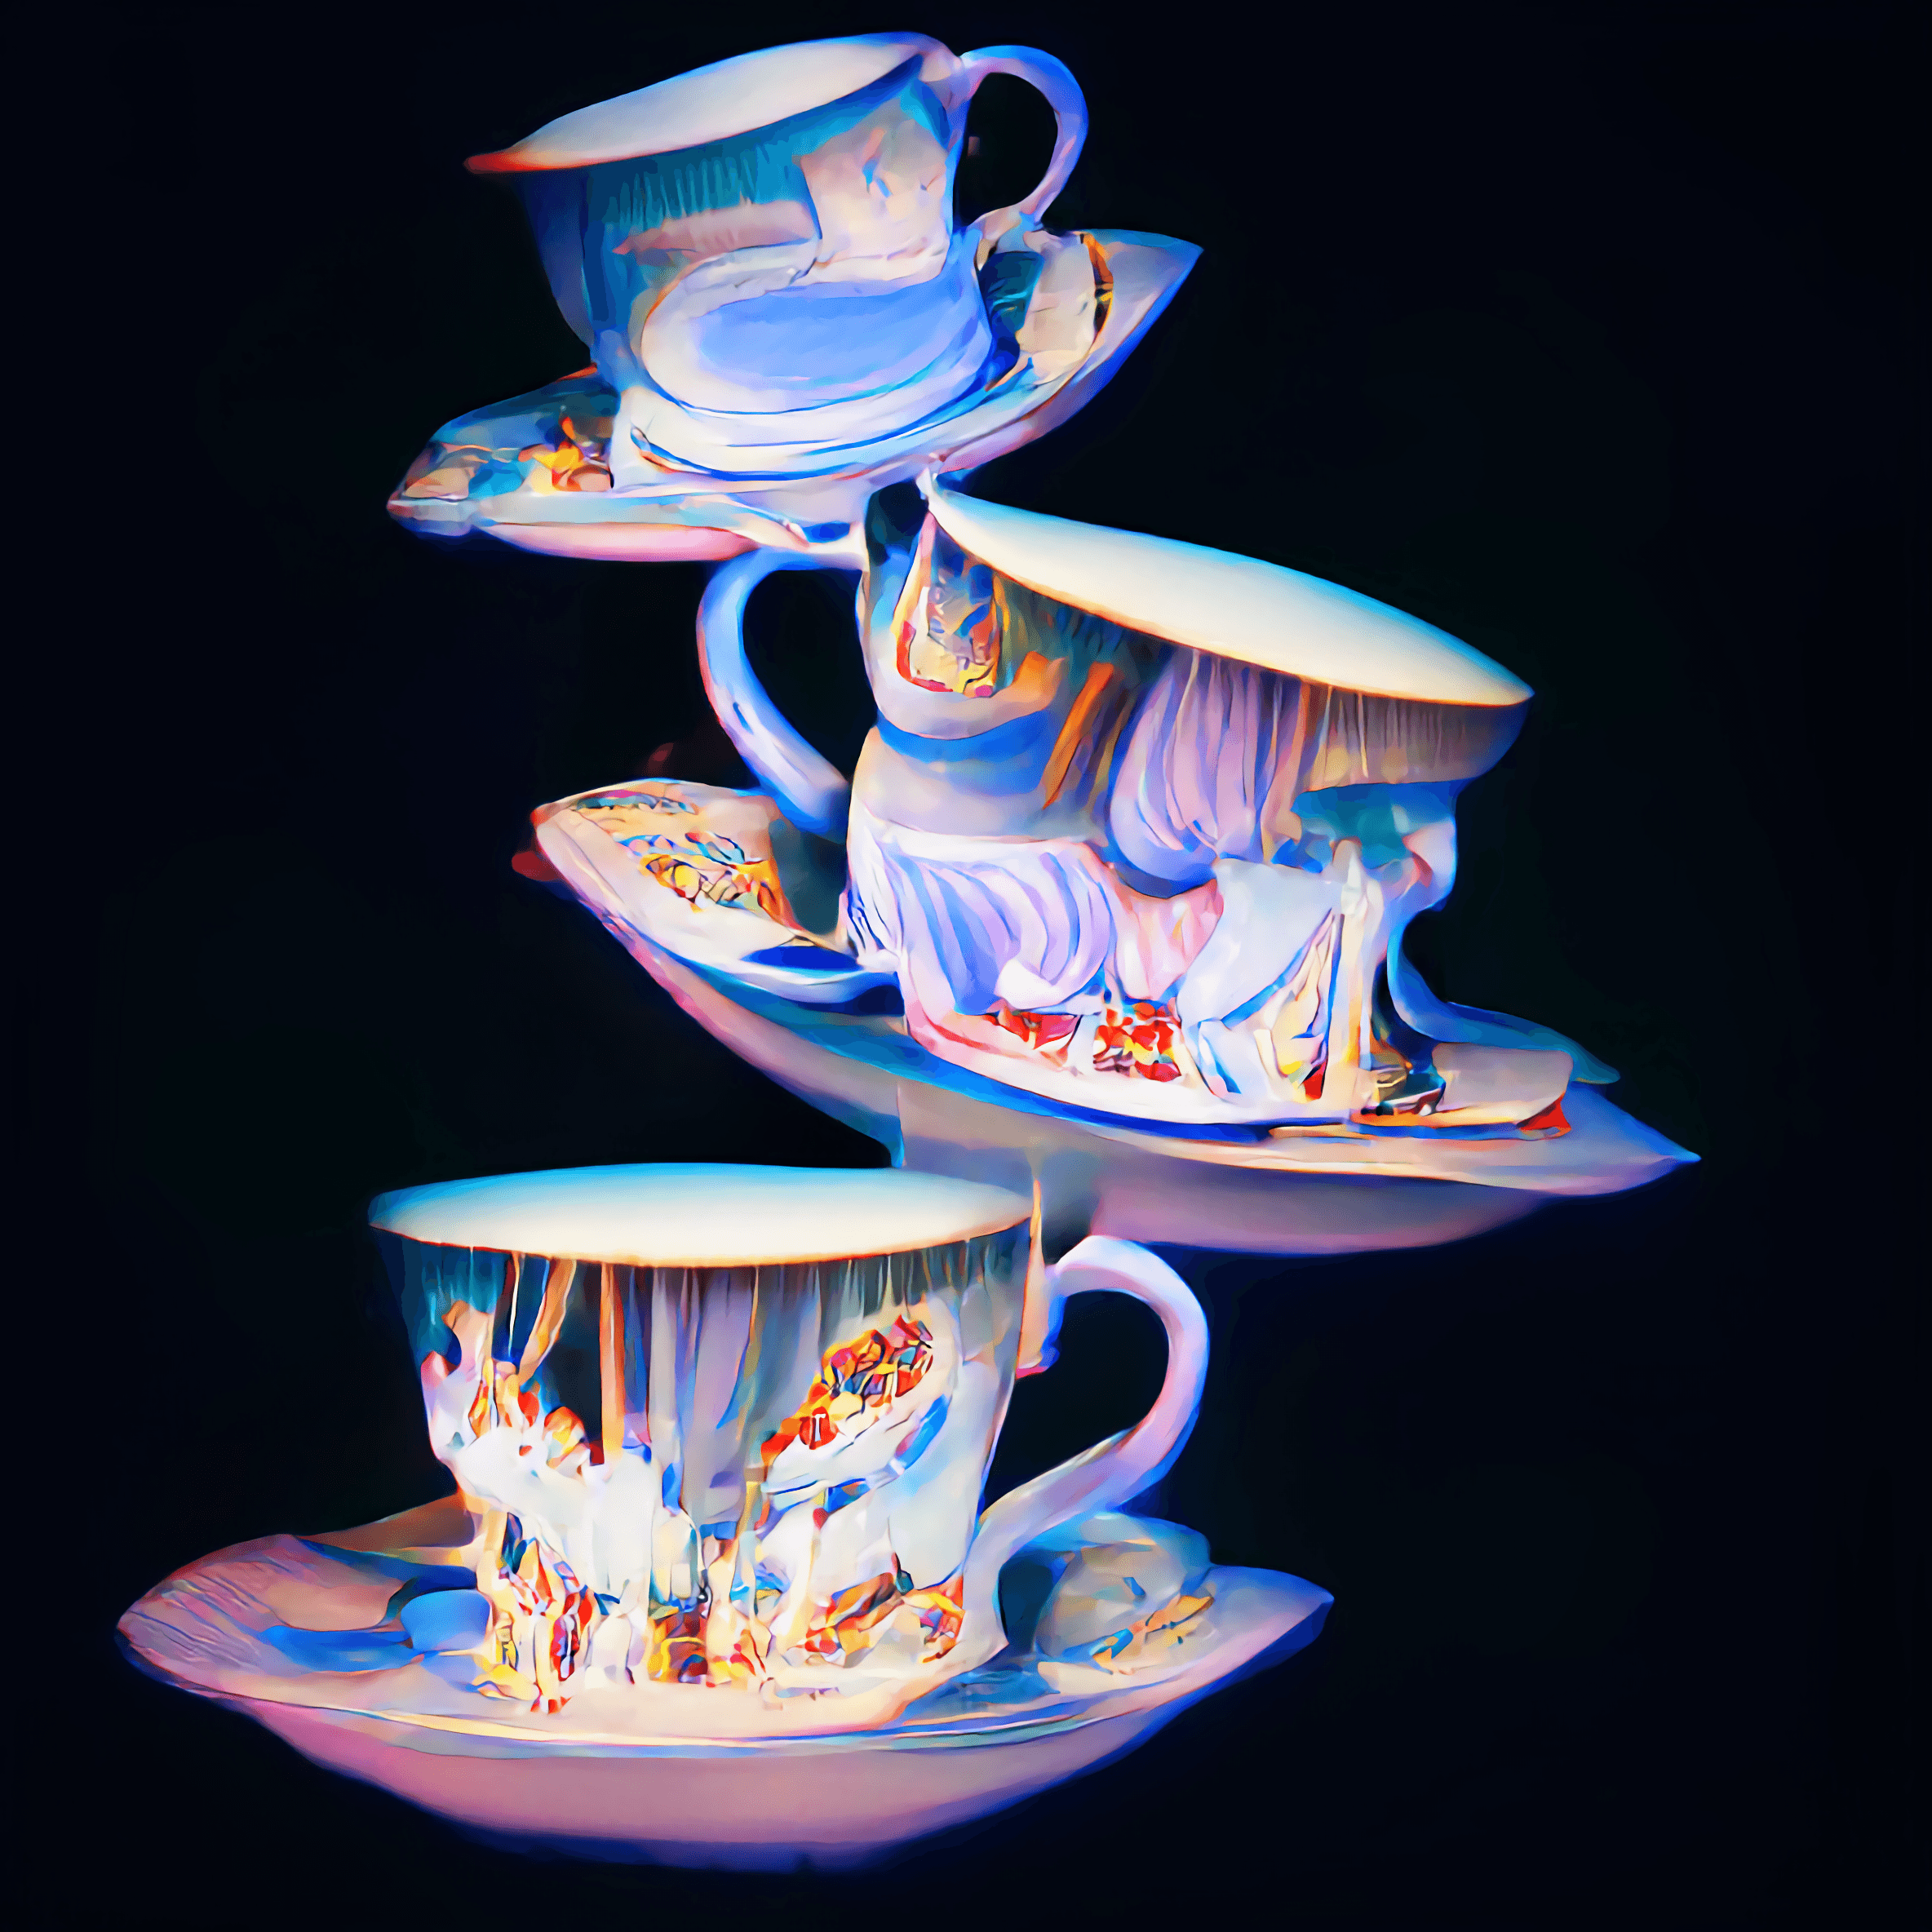 A Mad Tea Party [#093]